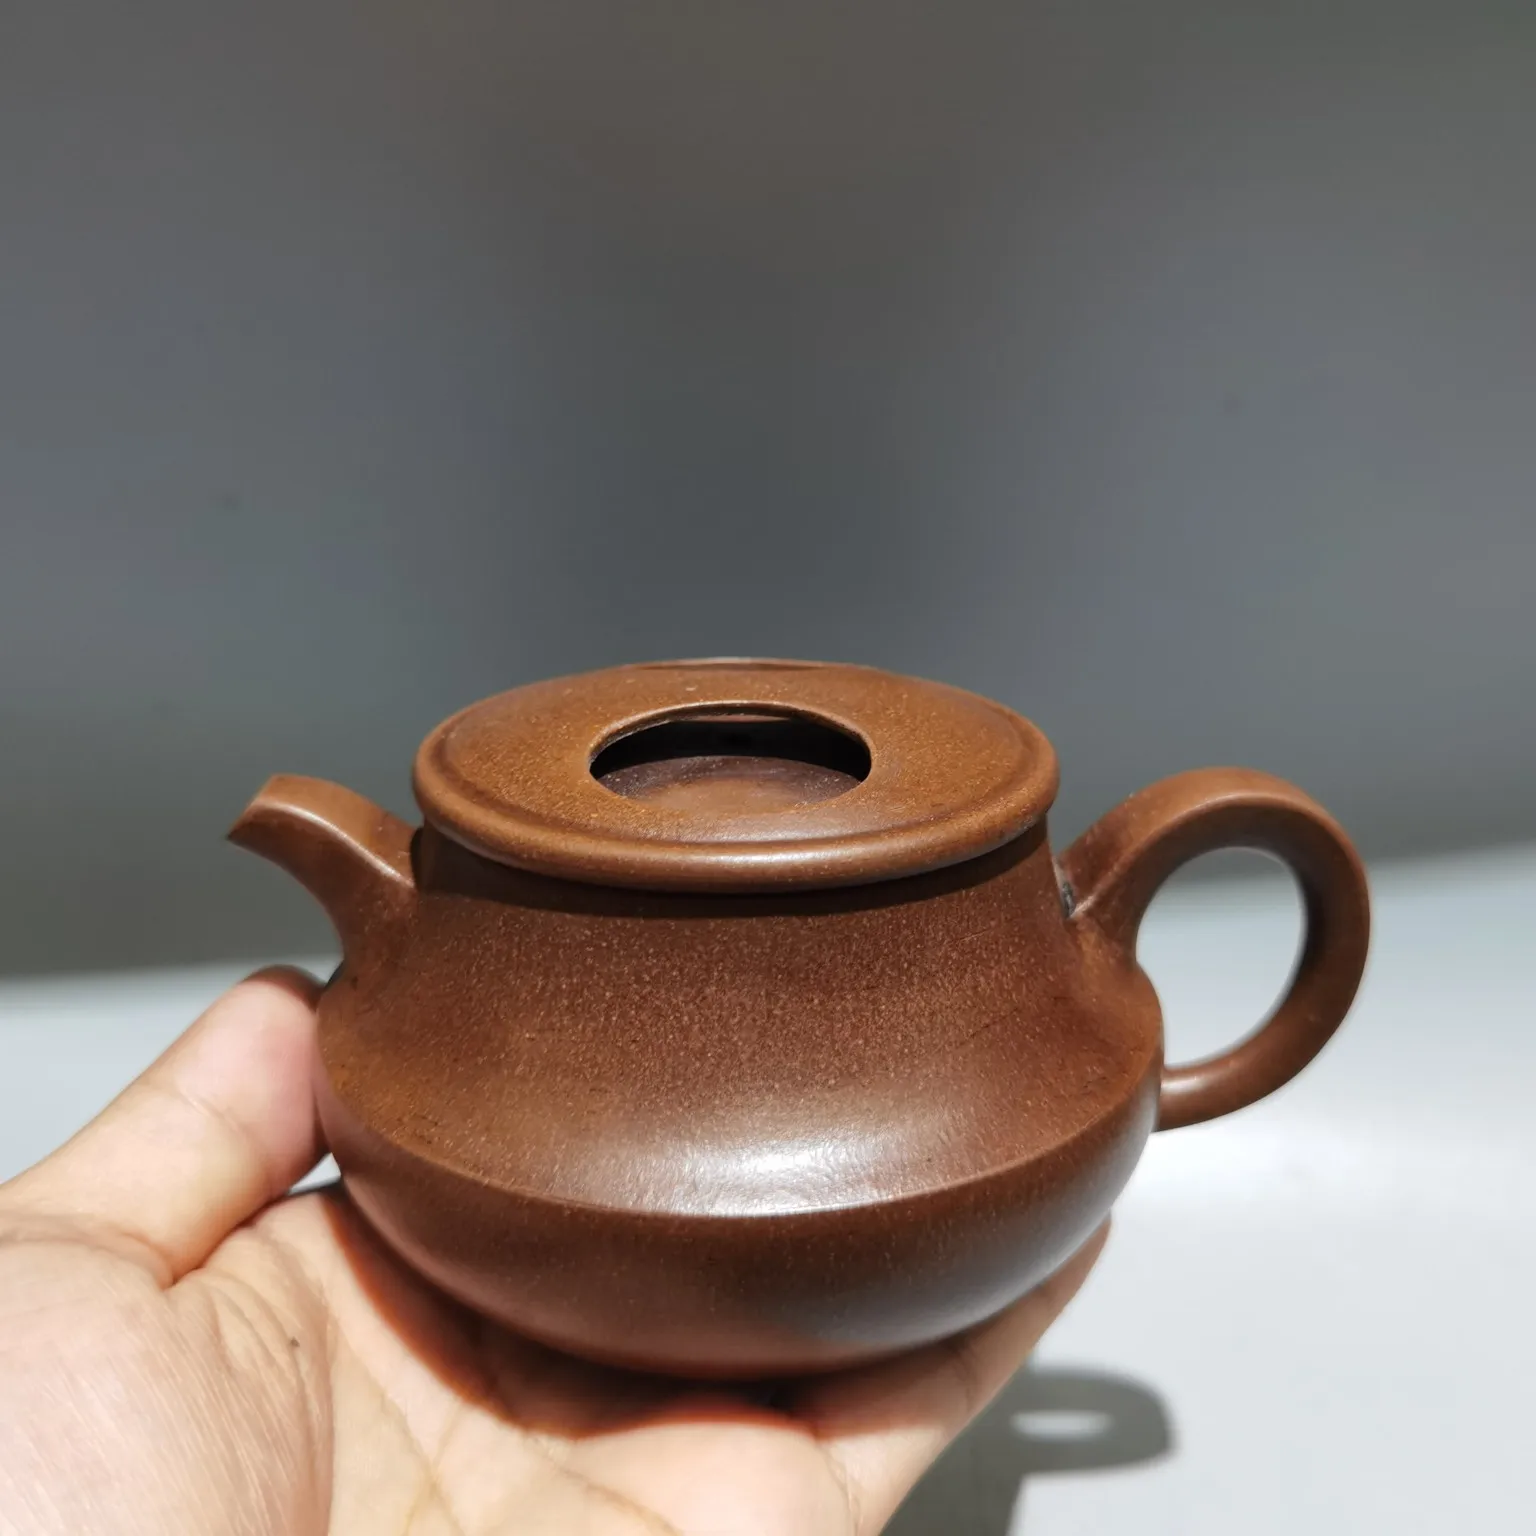 

Home Crafts Purple Clay Teapots With Exquisite Workmanship And Beautiful Appearance Are Worth Decorating And Collecting